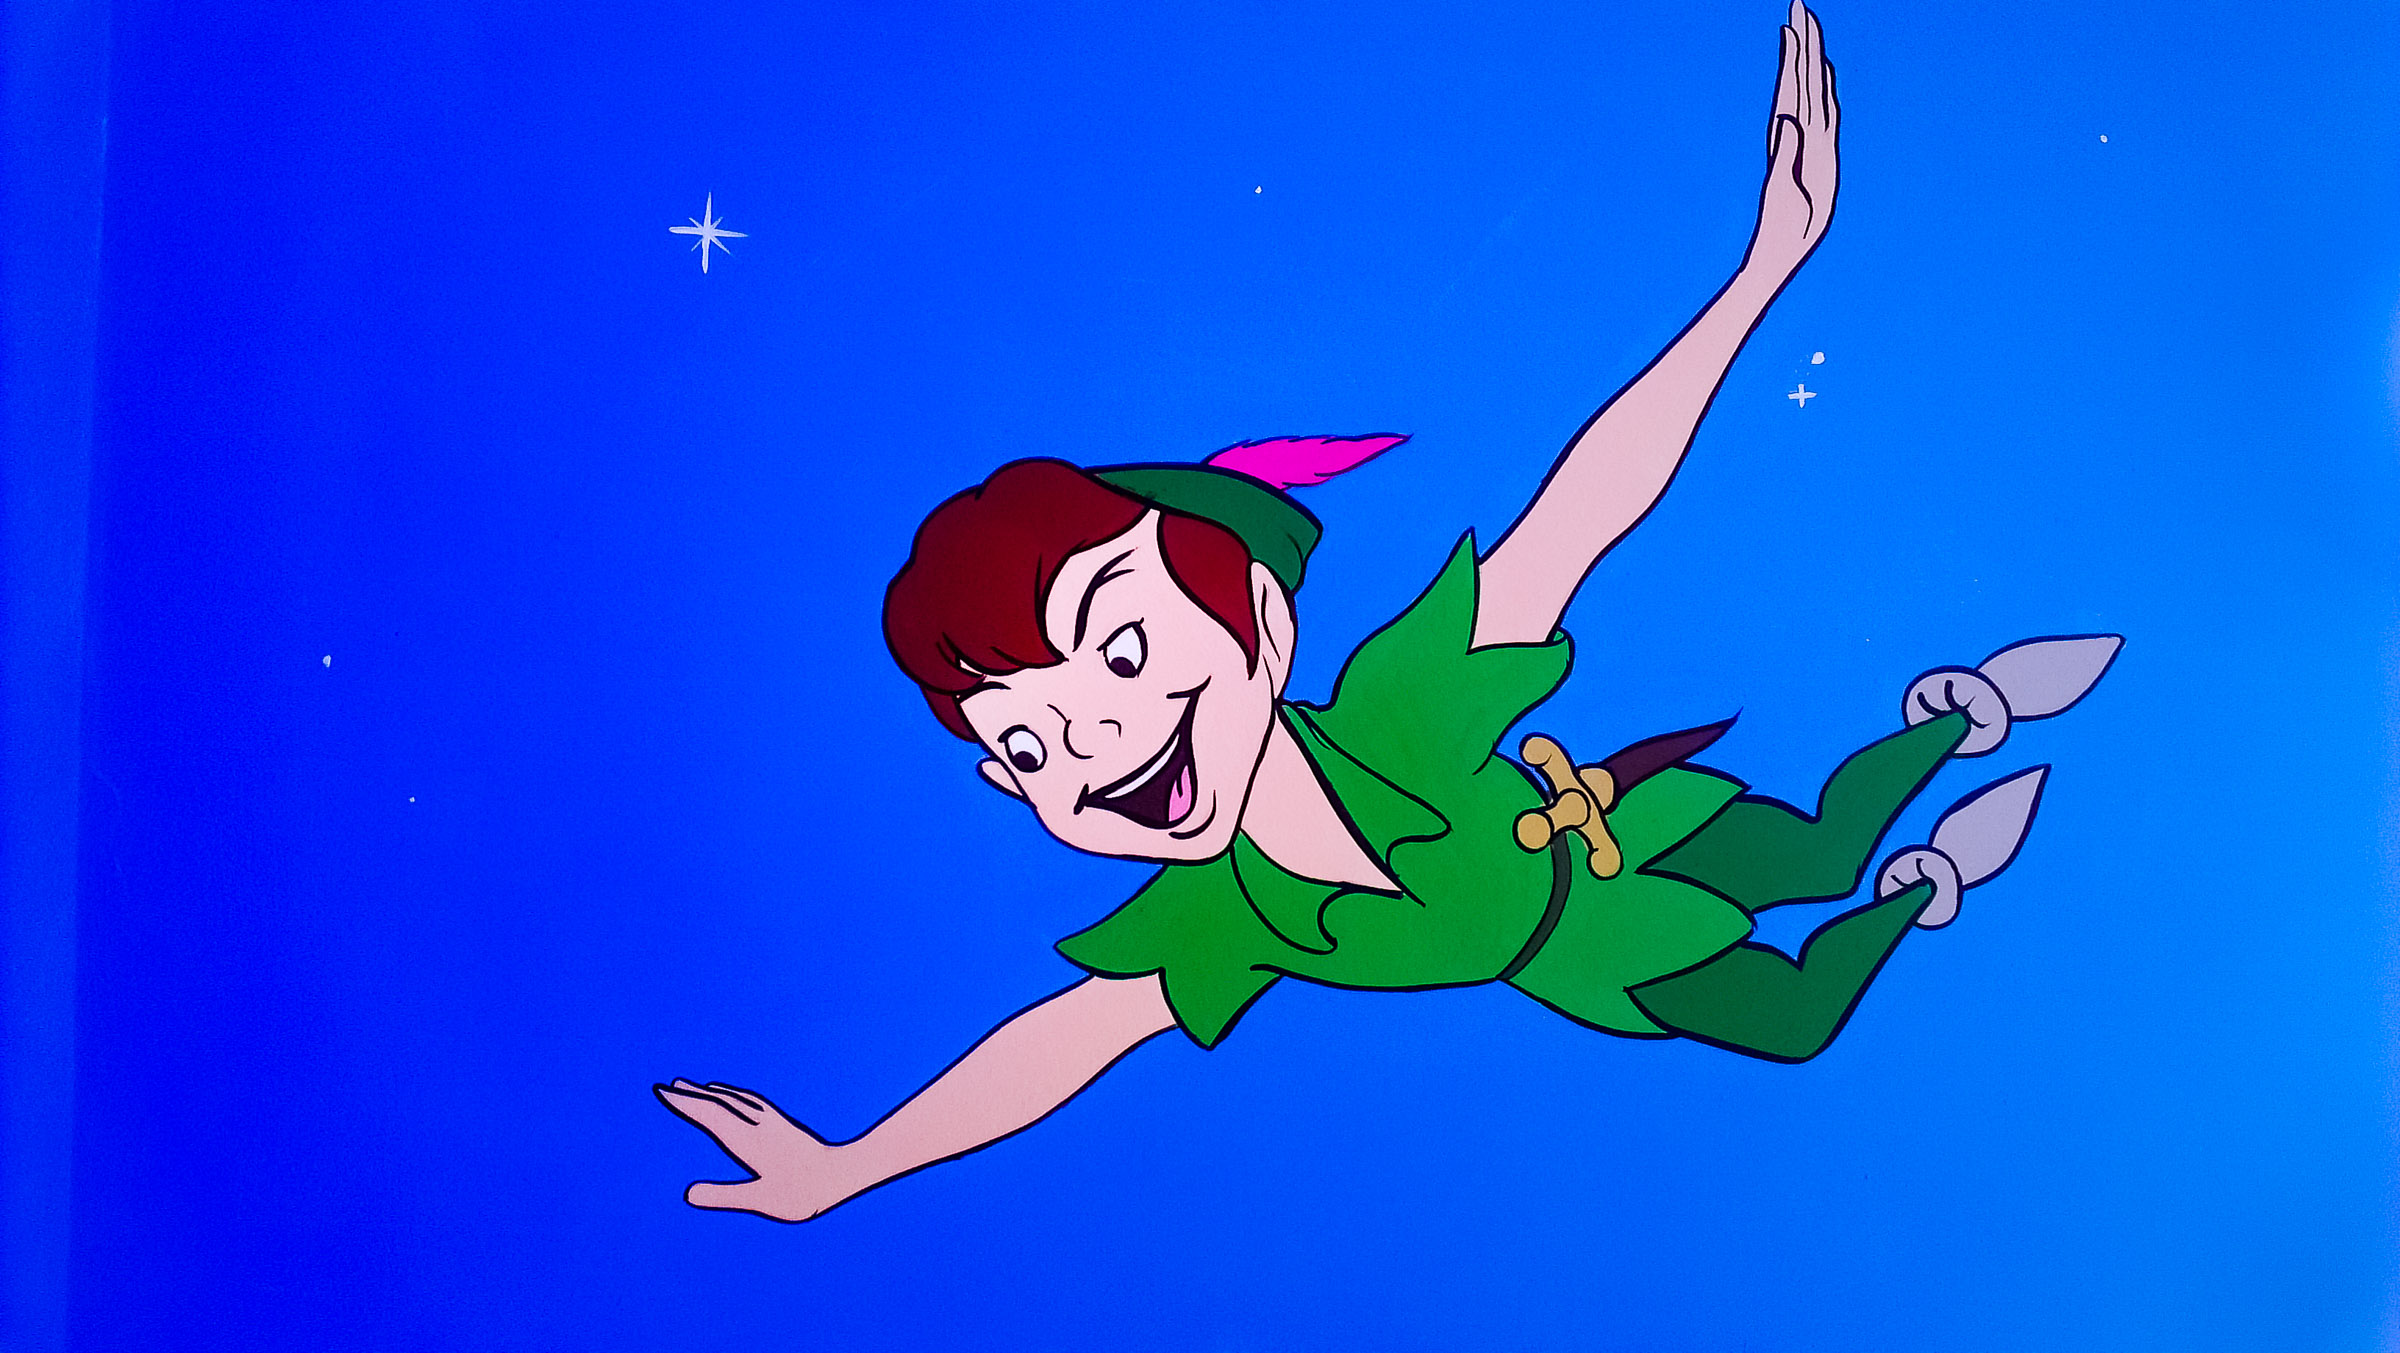 'You can fly!' Peter Pan firing the imagination